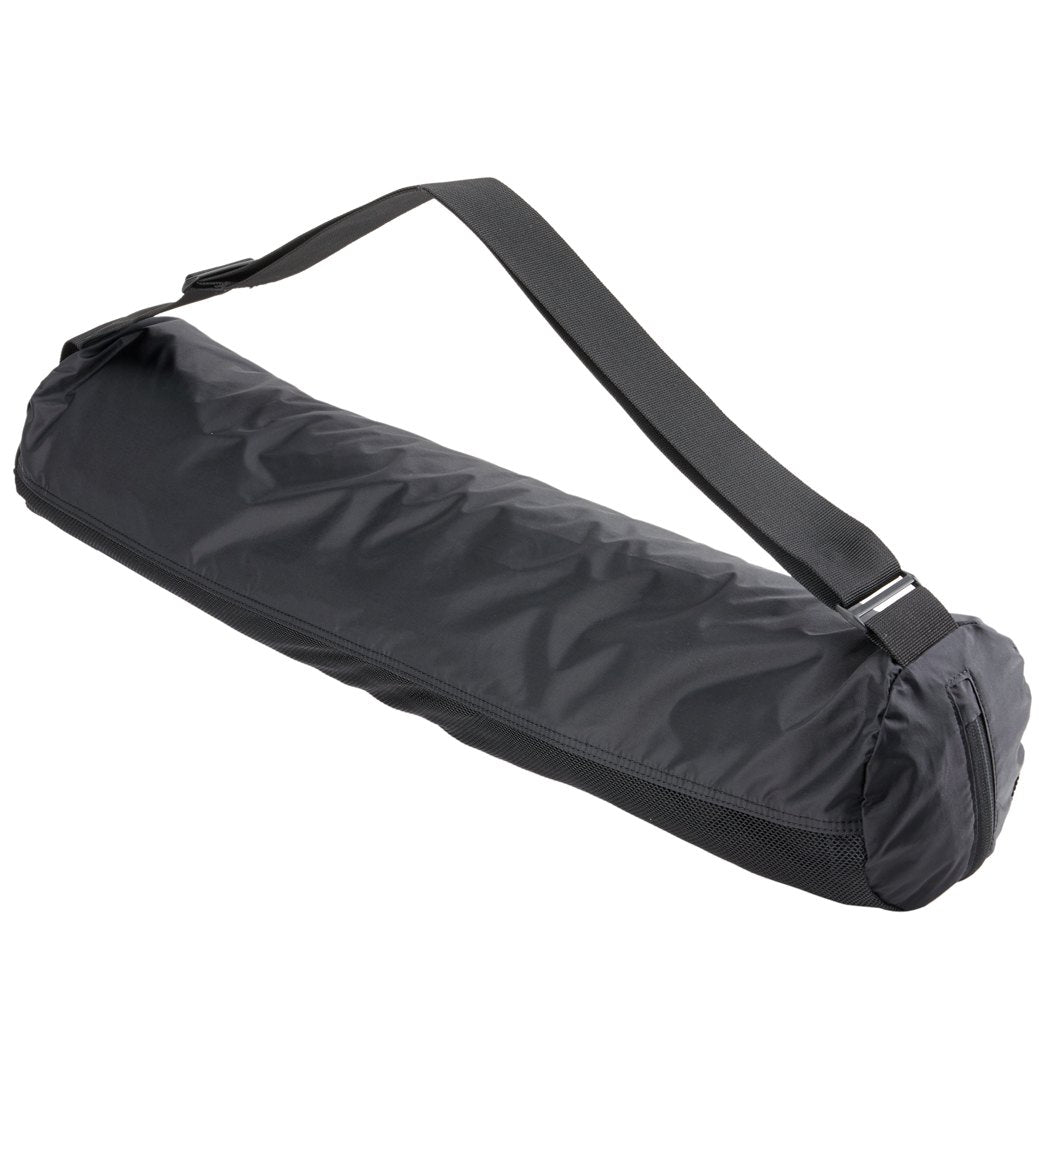 Shop Certified Calm, Take your yoga mat in a bag that blends breathable  mesh with superior mobility. The Manduka Breathe Easy Yoga Mat Bag is  lightweight and